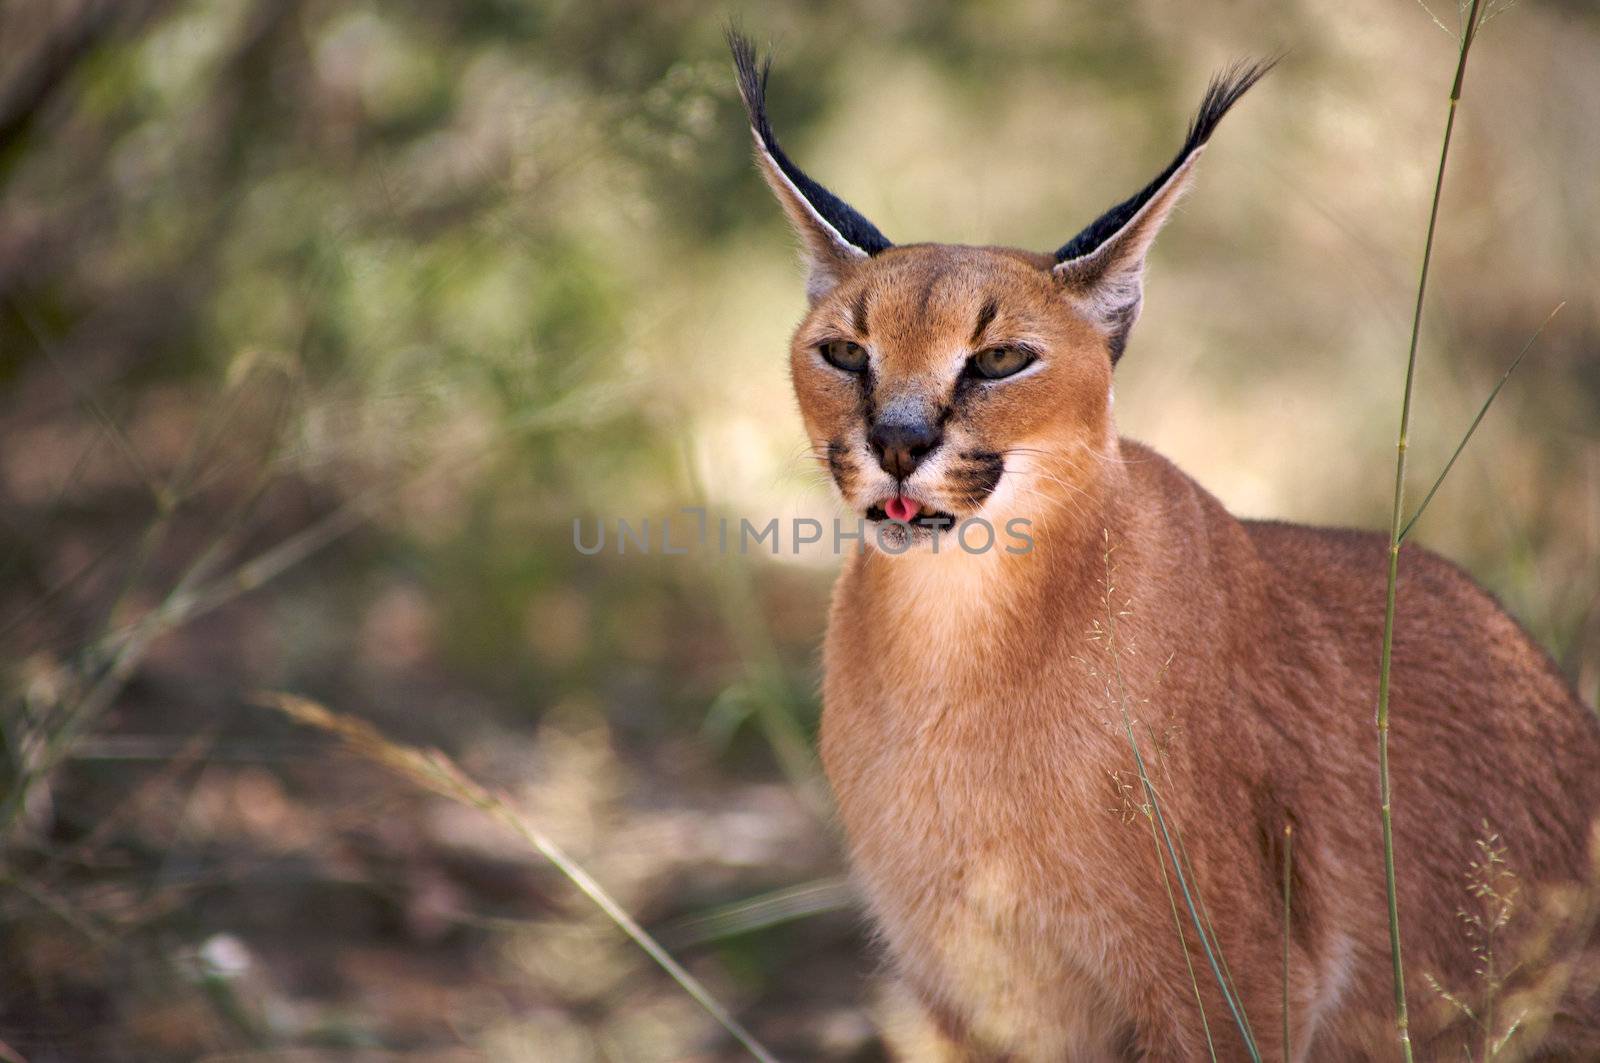 Caracal in Harnas Foundation in Namibia